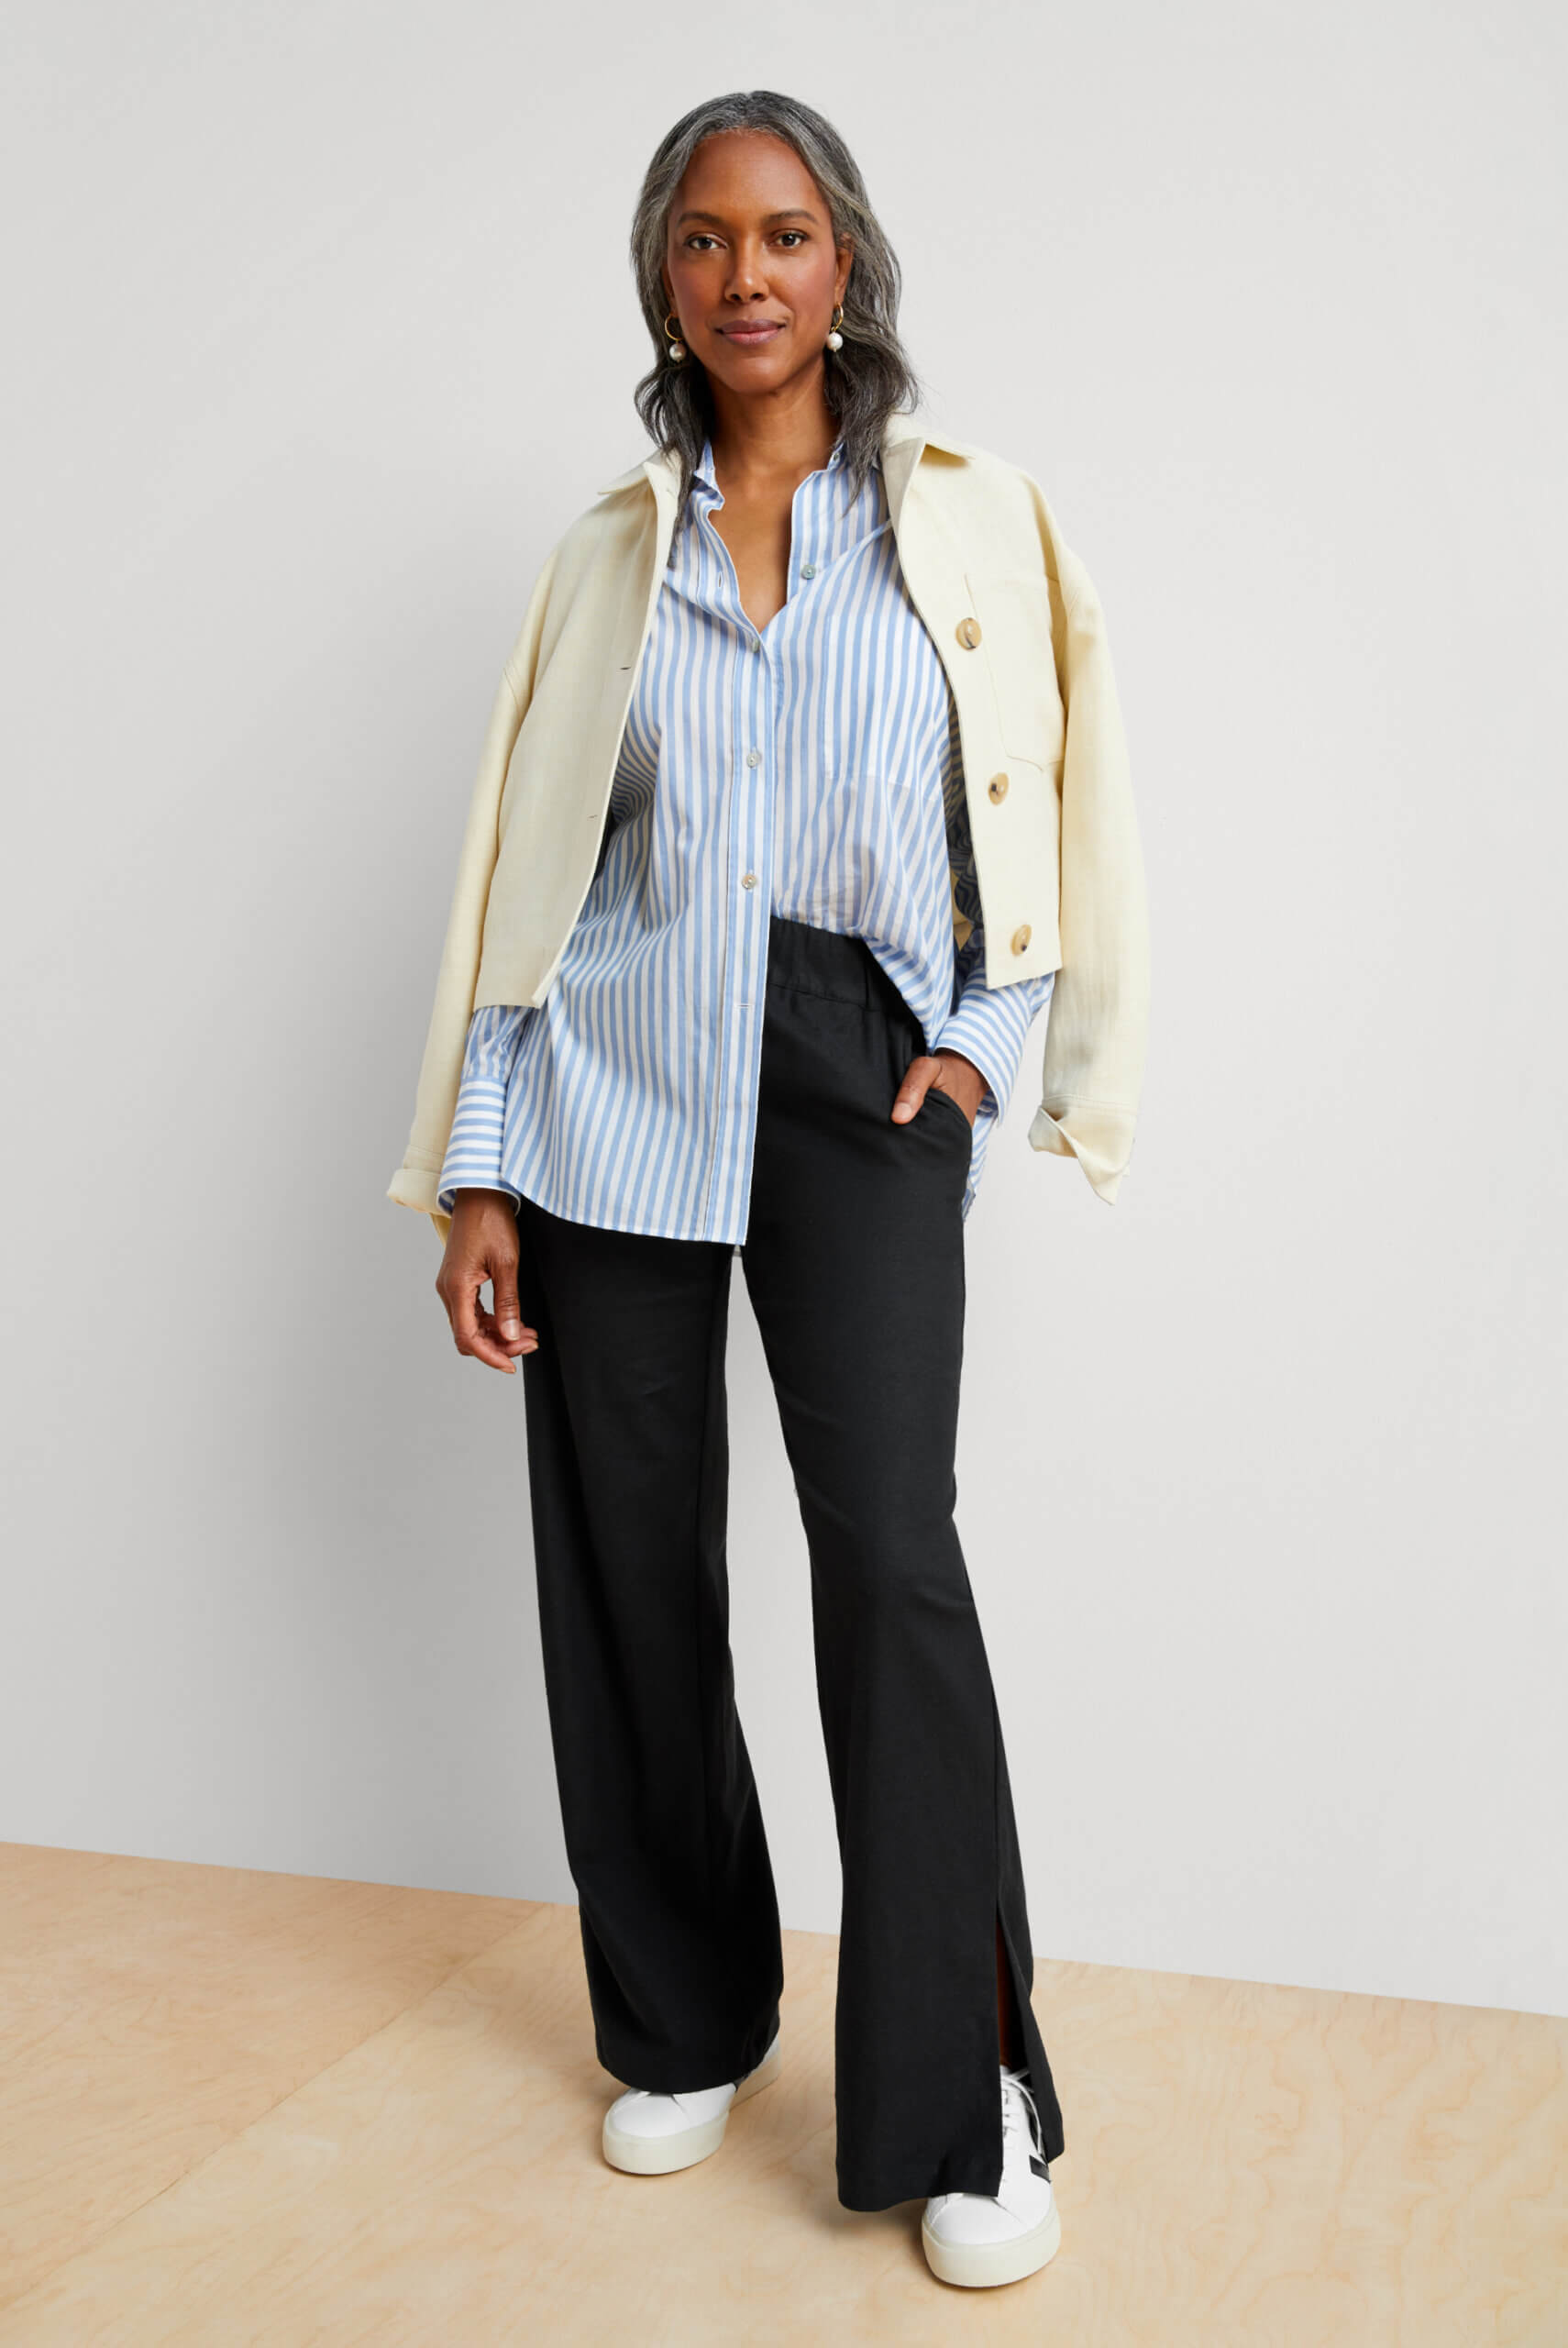 Black woman in striped, blue button-down shirt half tucked into dark blue pants with a cream blazer resting on her shoulders. 